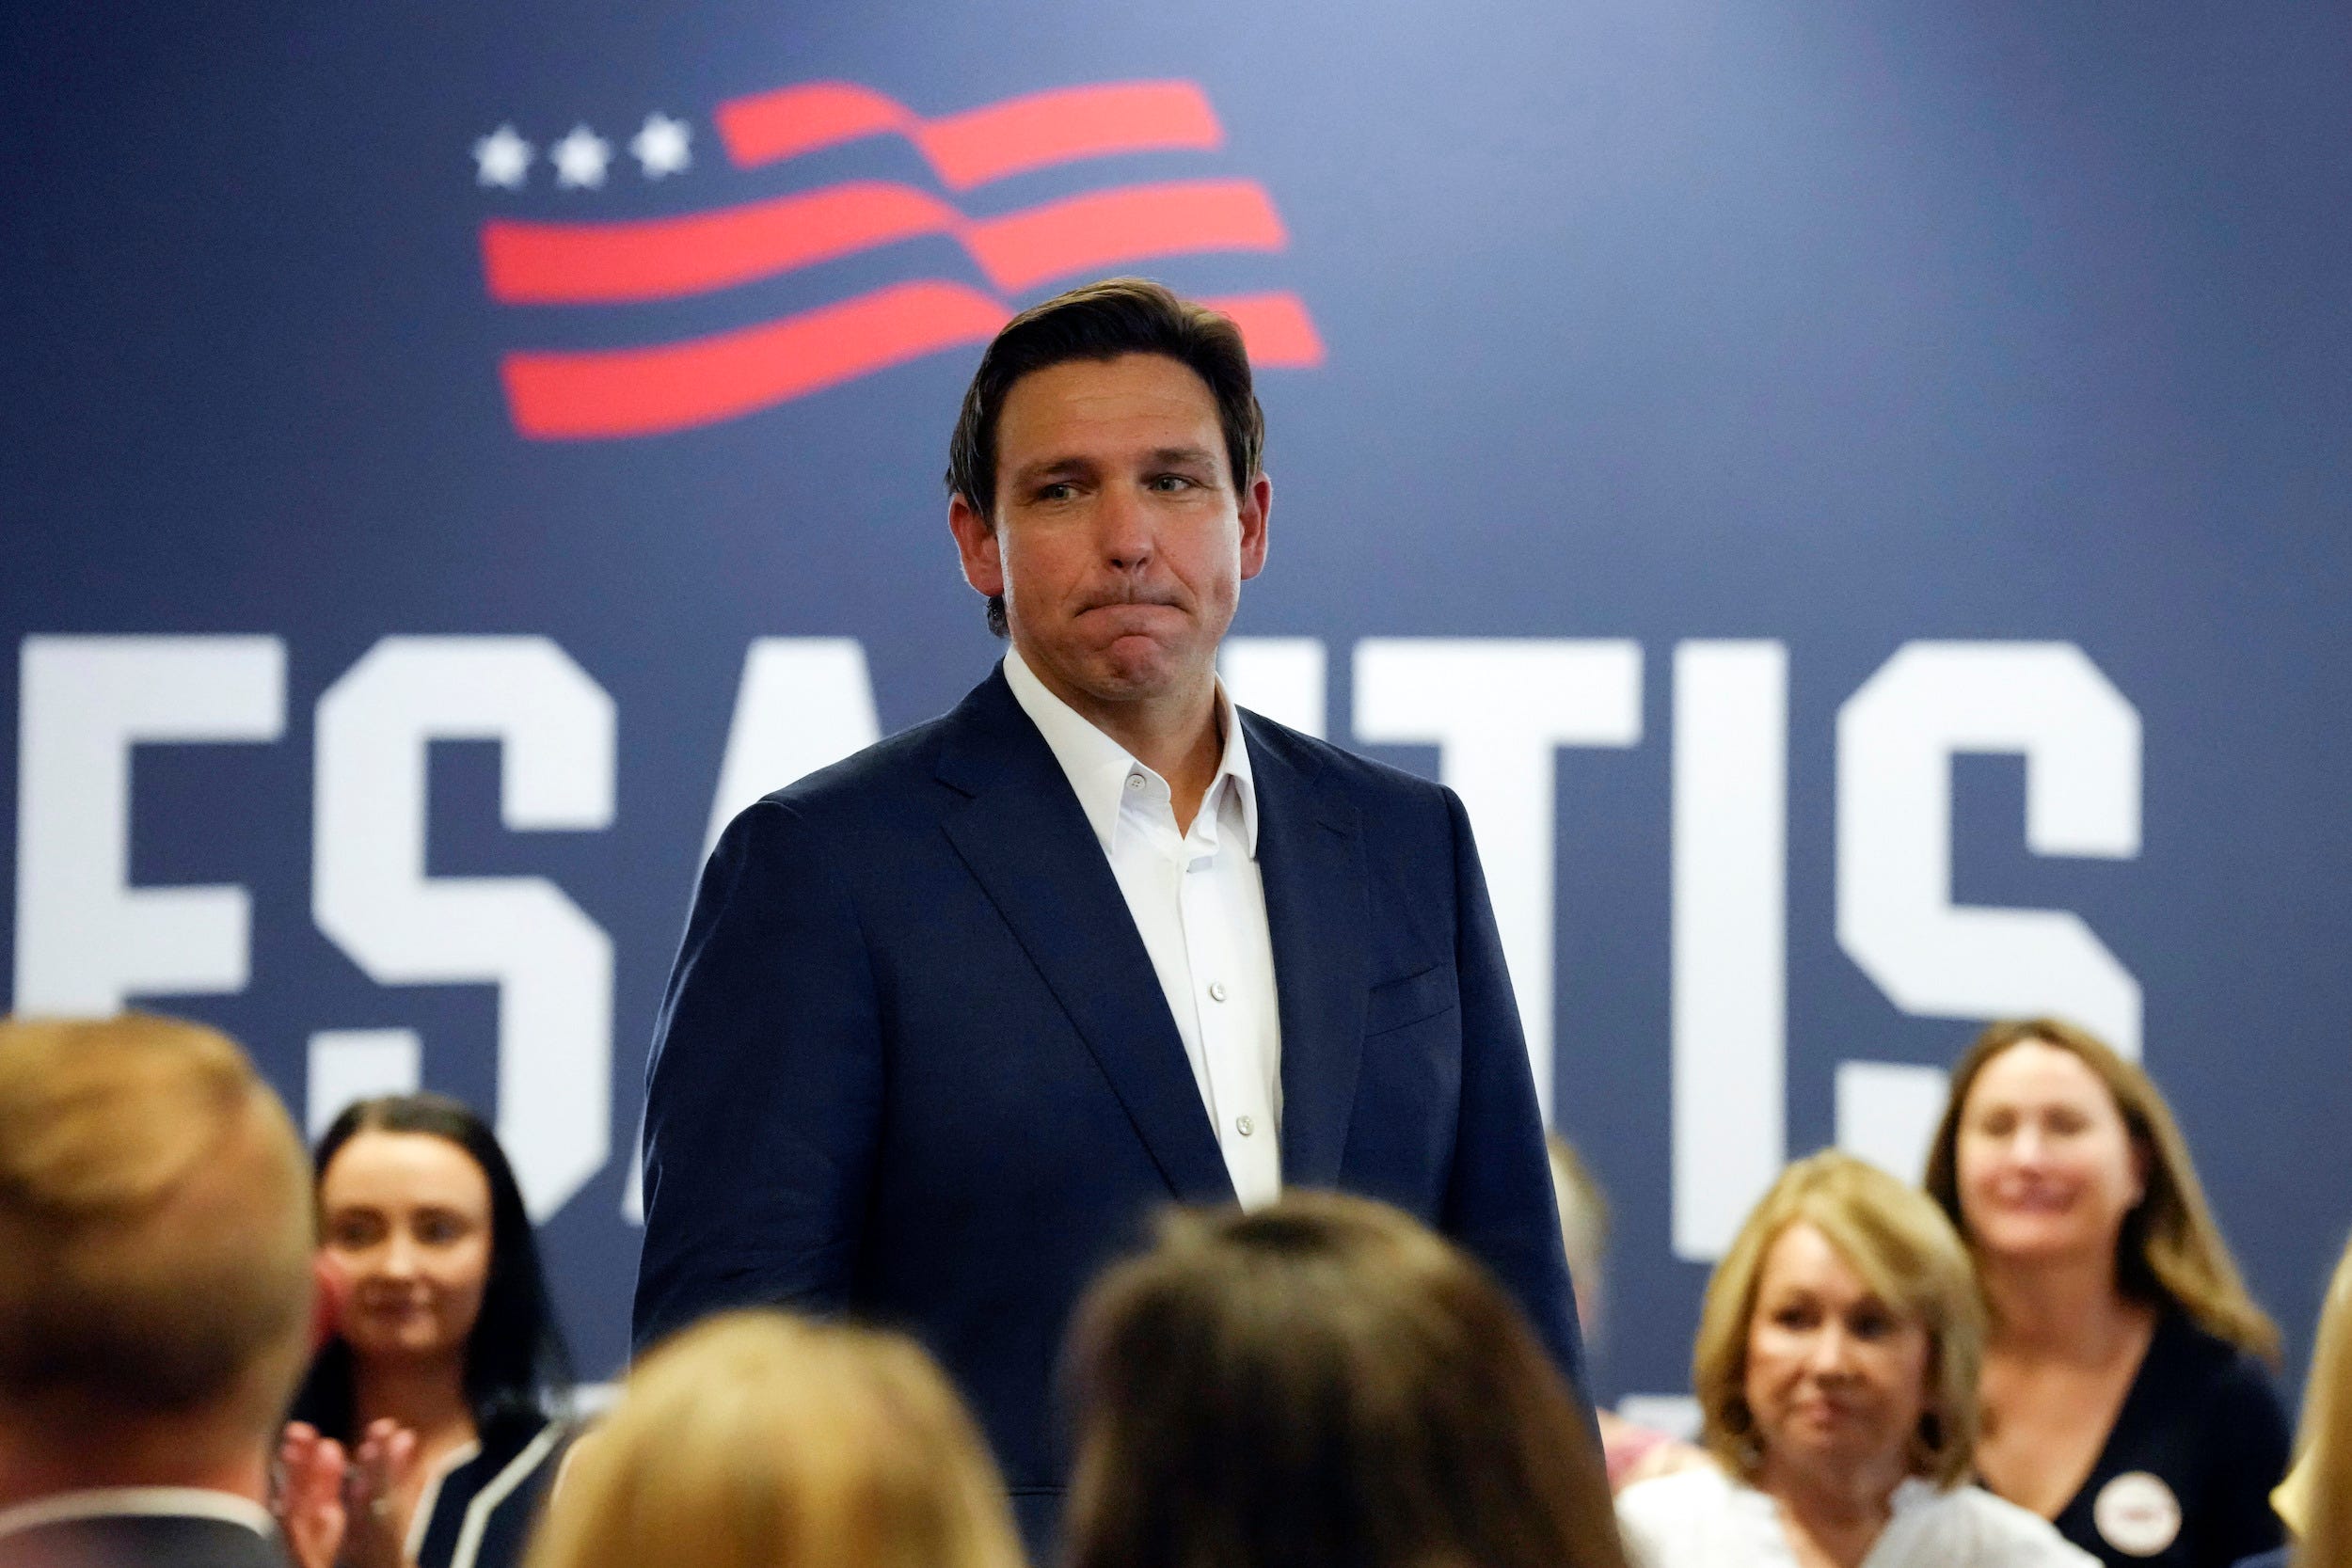 desantis uses fake winston churchill quote as he ends disastrous presidential campaign